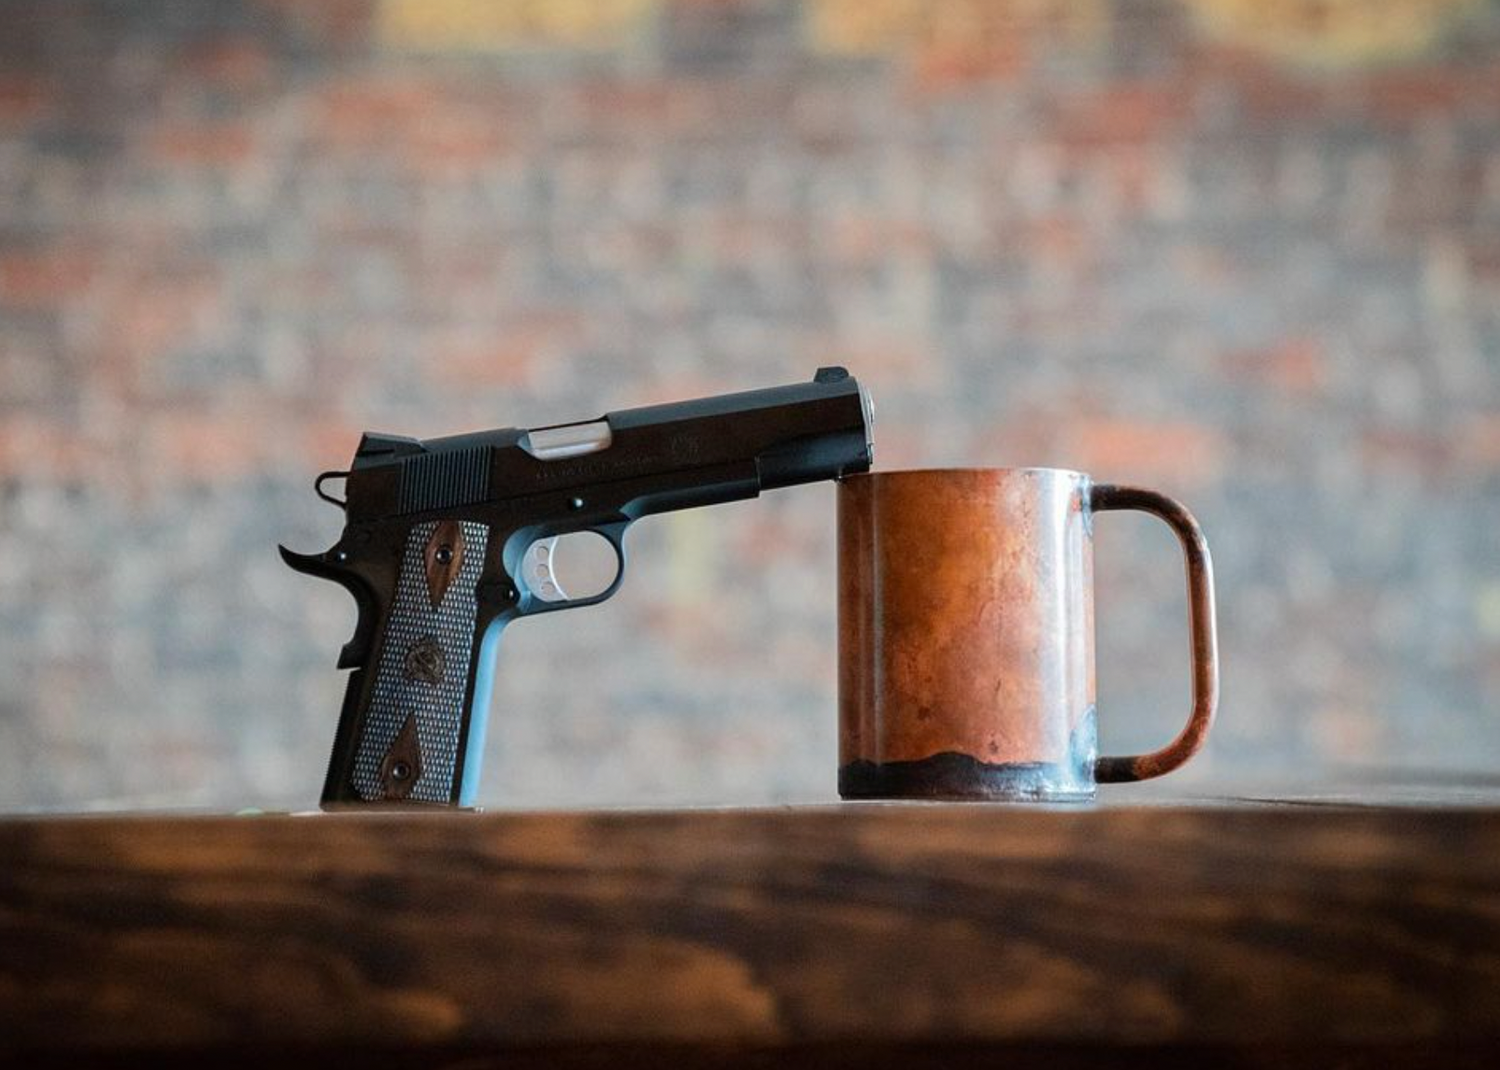 Copper Field Ethos Everything Mug sitting next to a pistol on a table.